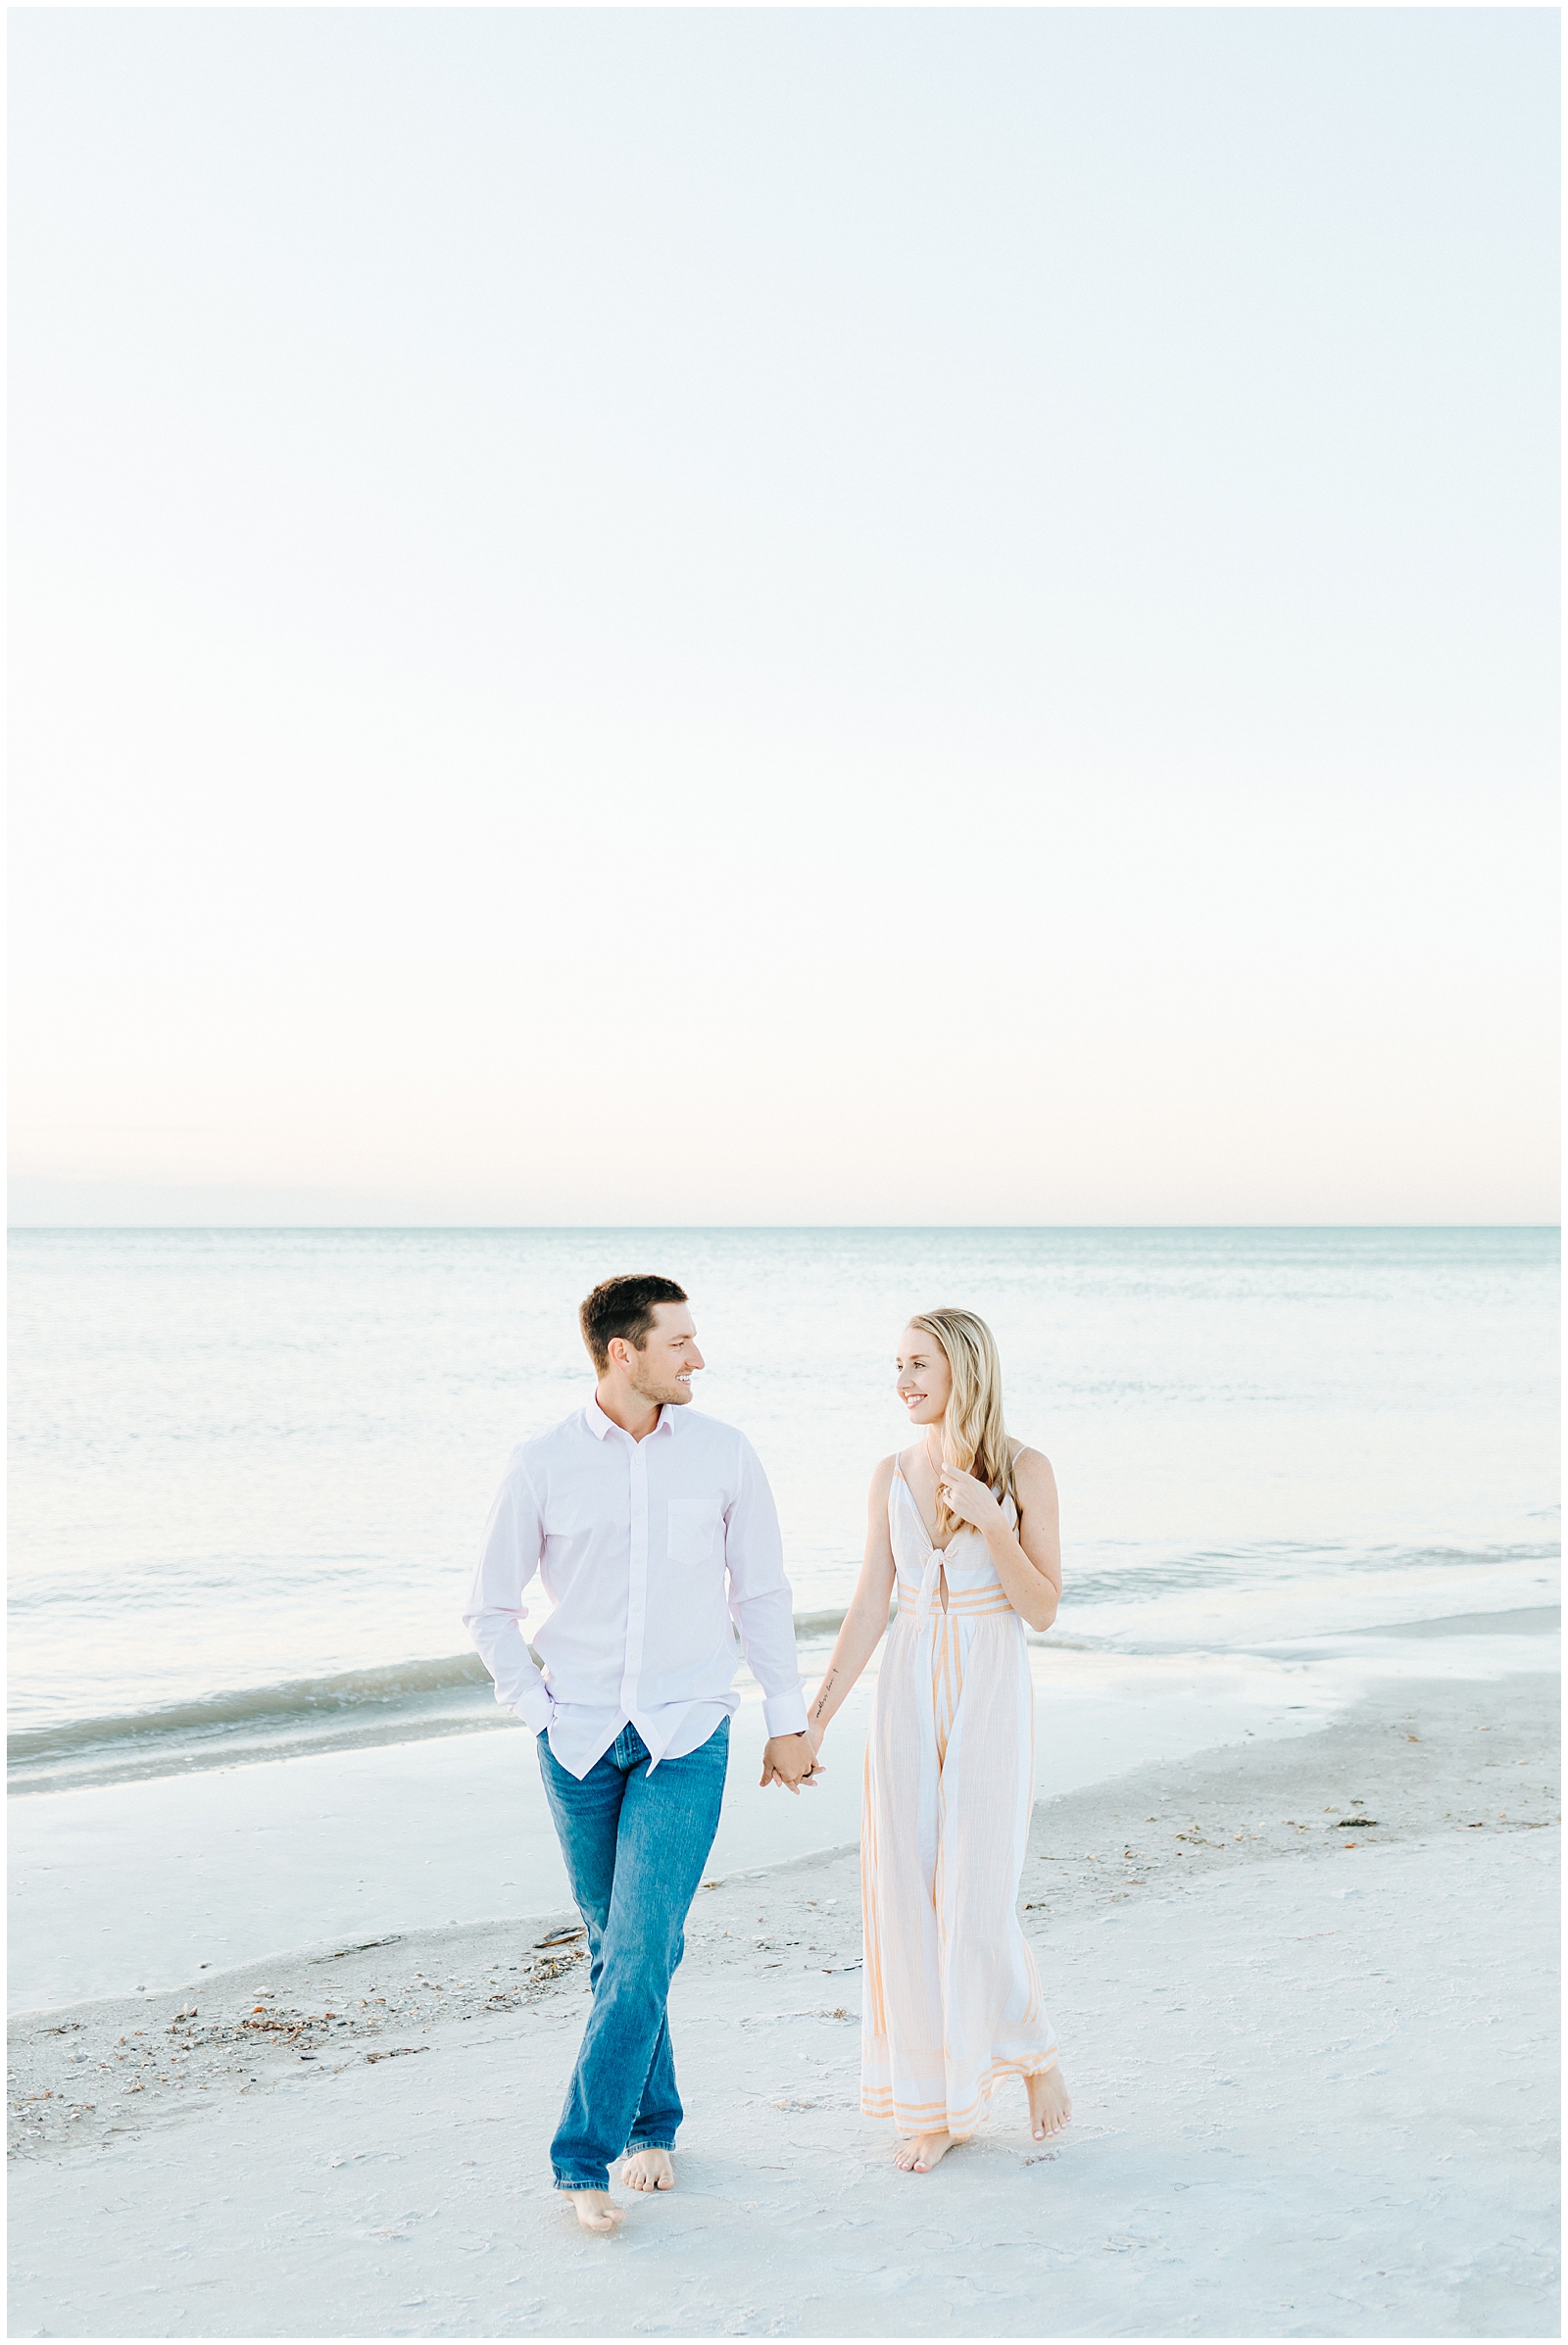 Beachy Dreamy Fort Desoto Park Couples Anniversary Session Photos by Karli and David Photography